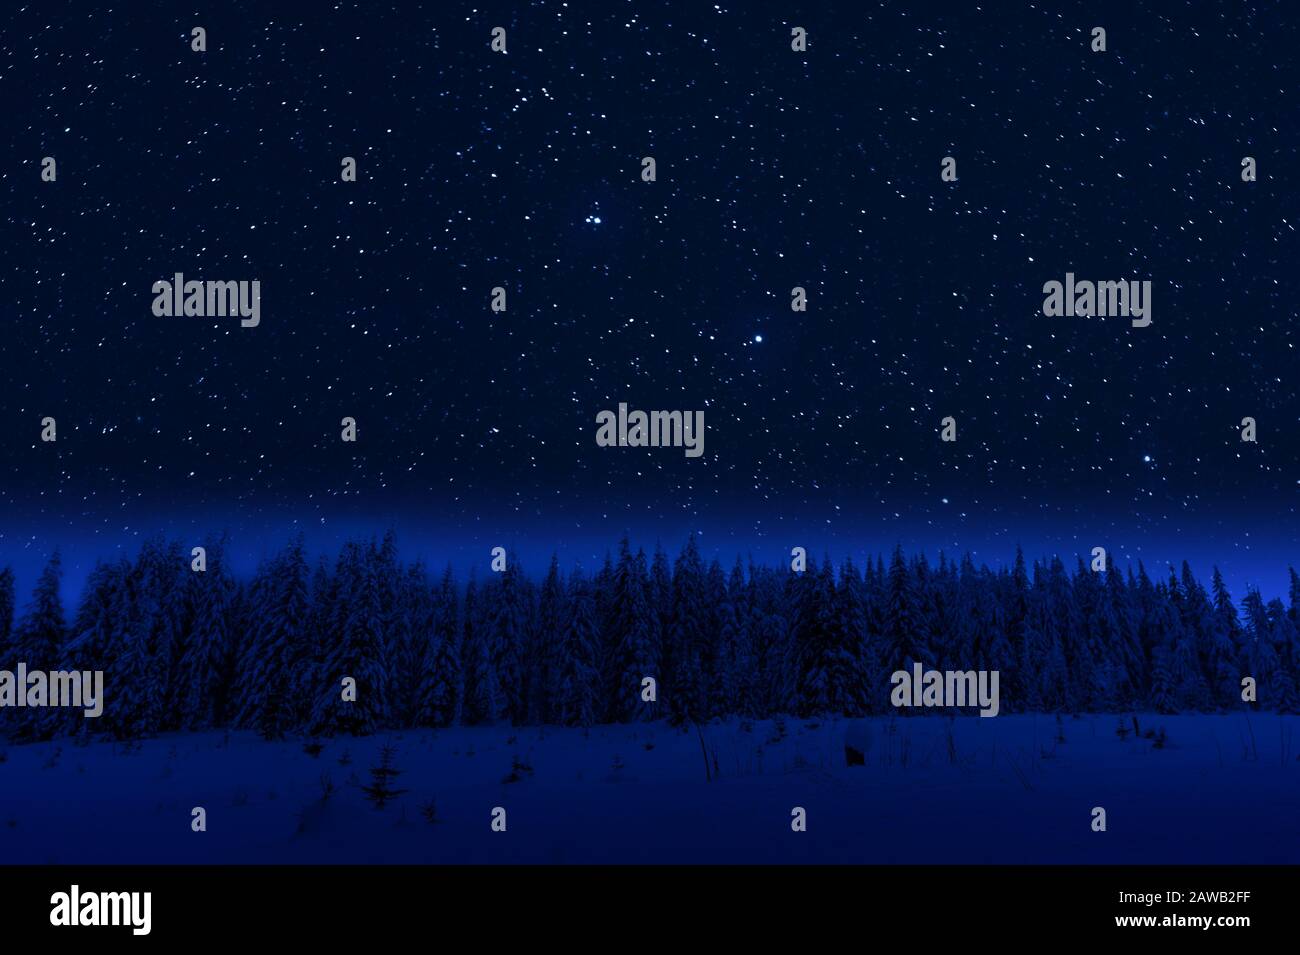 Night winter forest with snowy trees, landscape with white snow and stars in sky Stock Photo